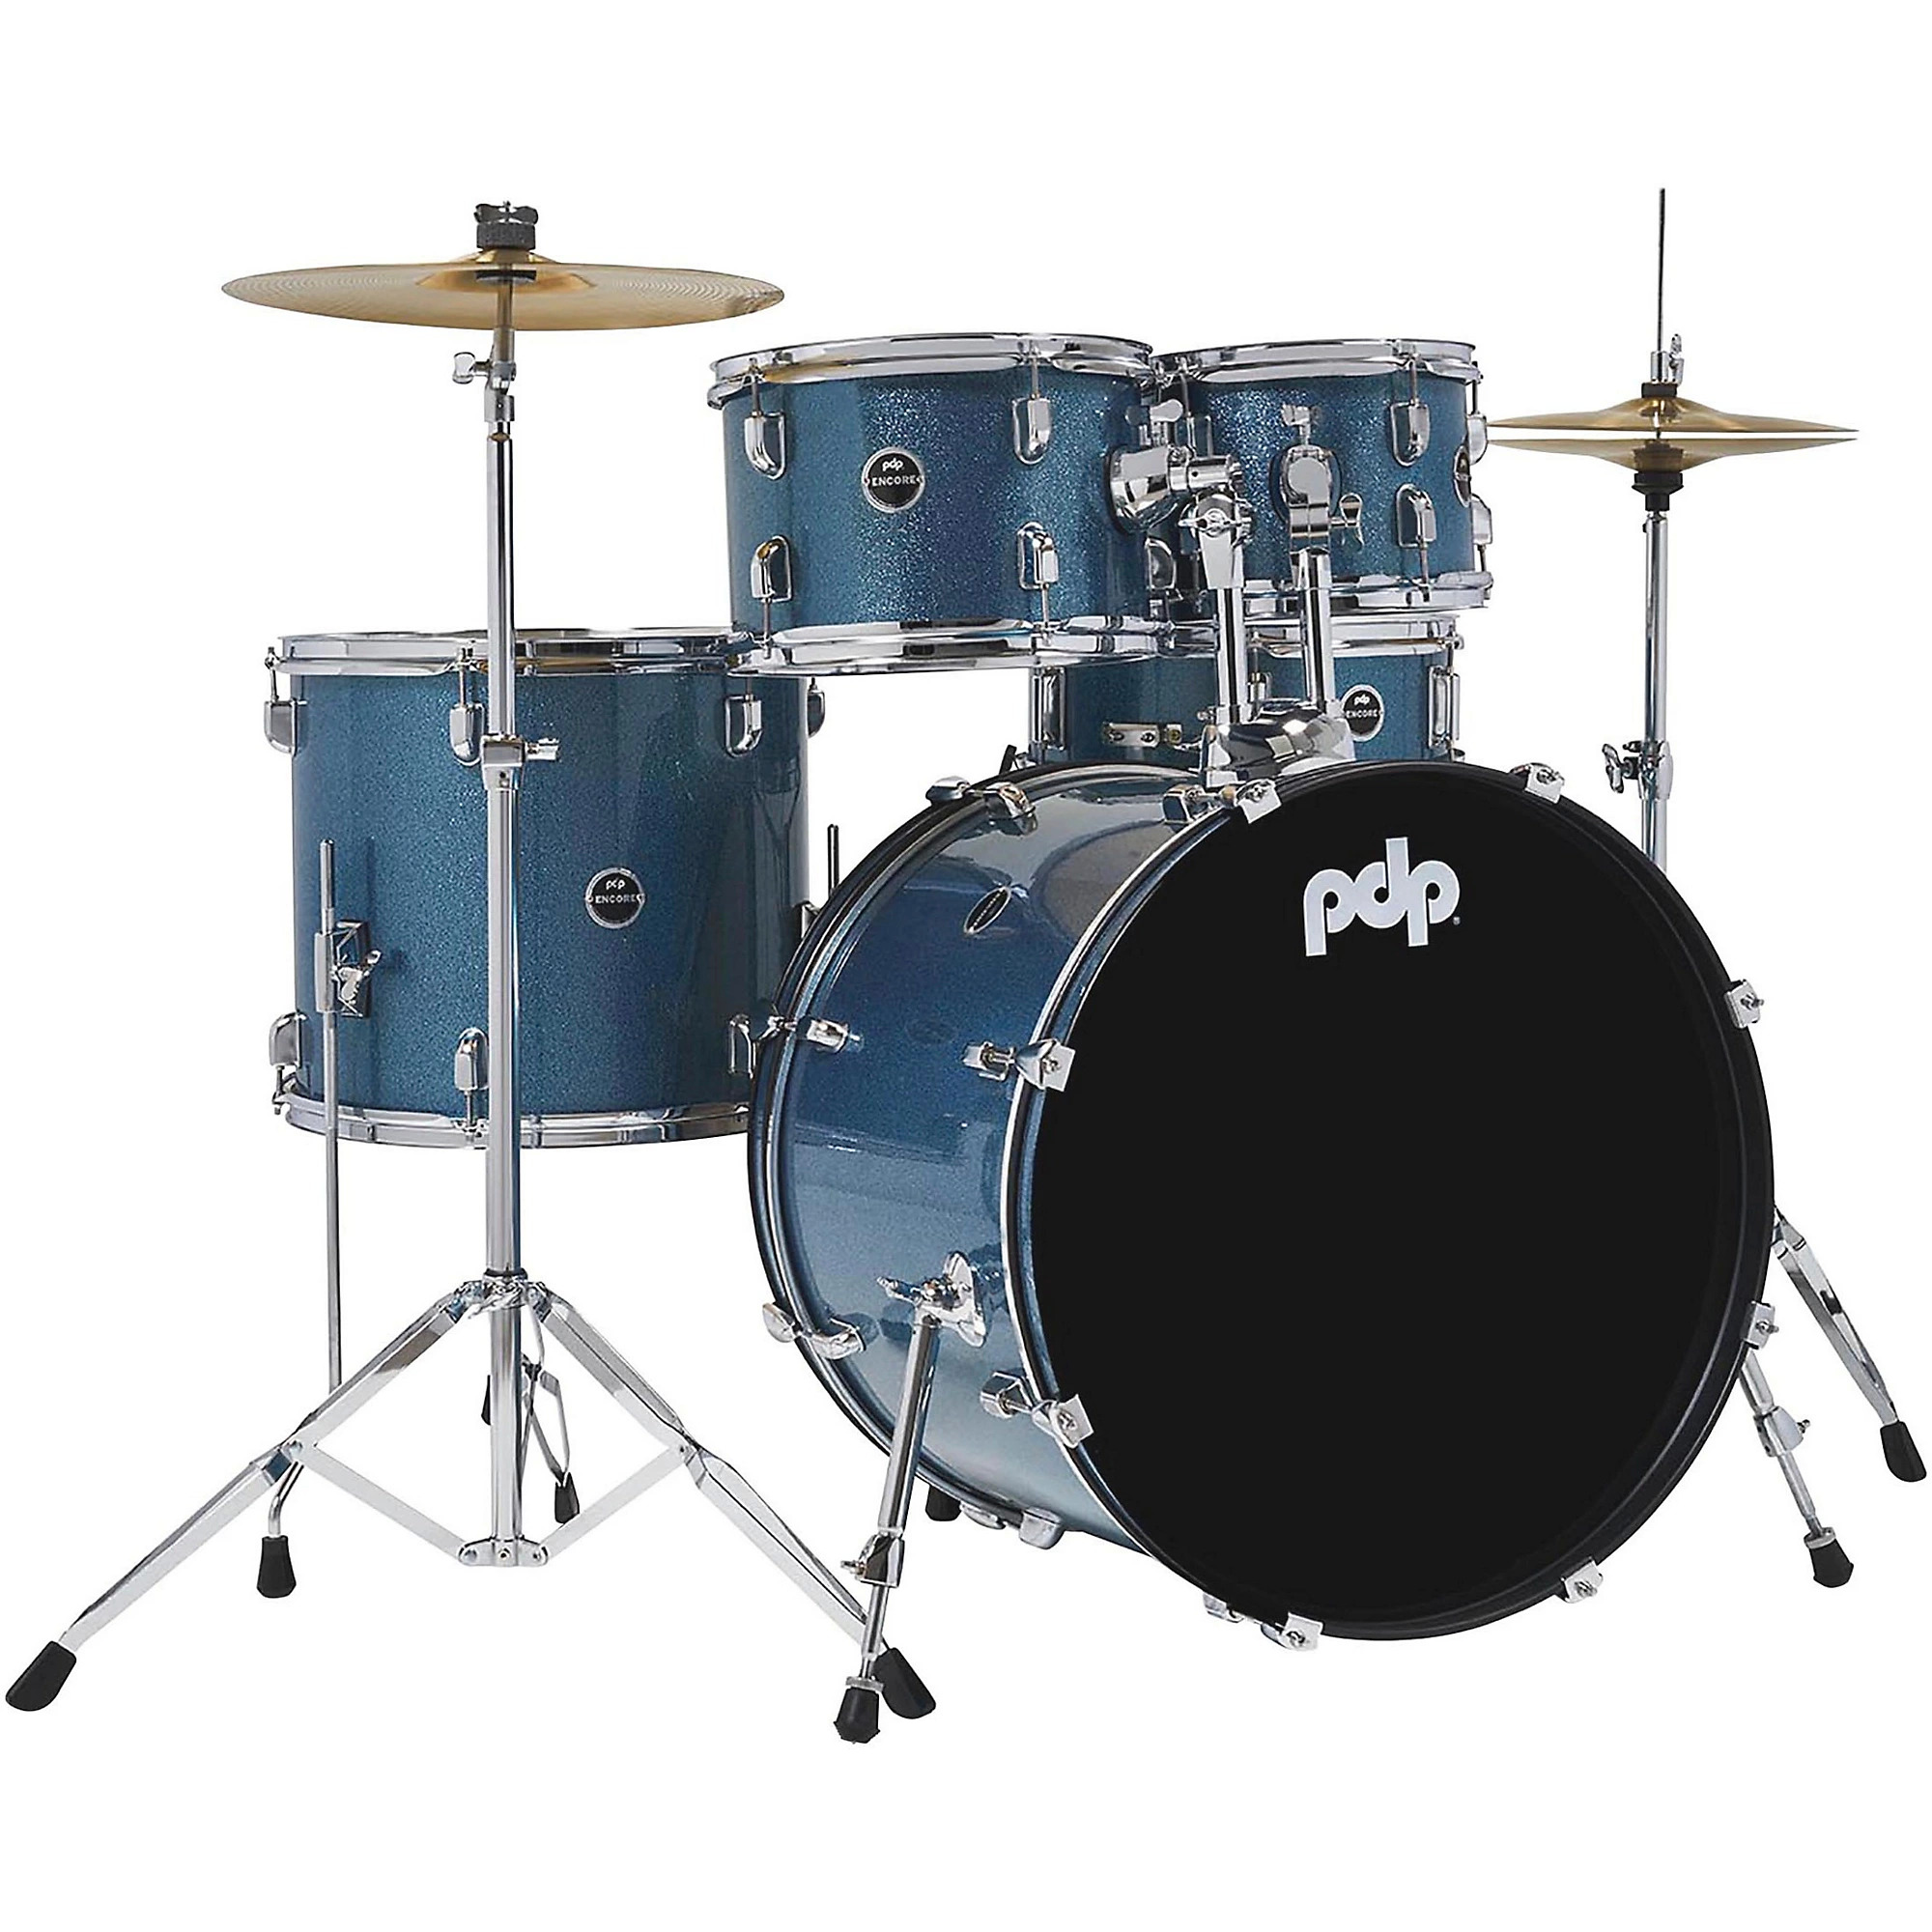 PDP by DW Encore Complete 5-Piece Drum Set With Chrome Hardware and Cymbals Azure Blue $199